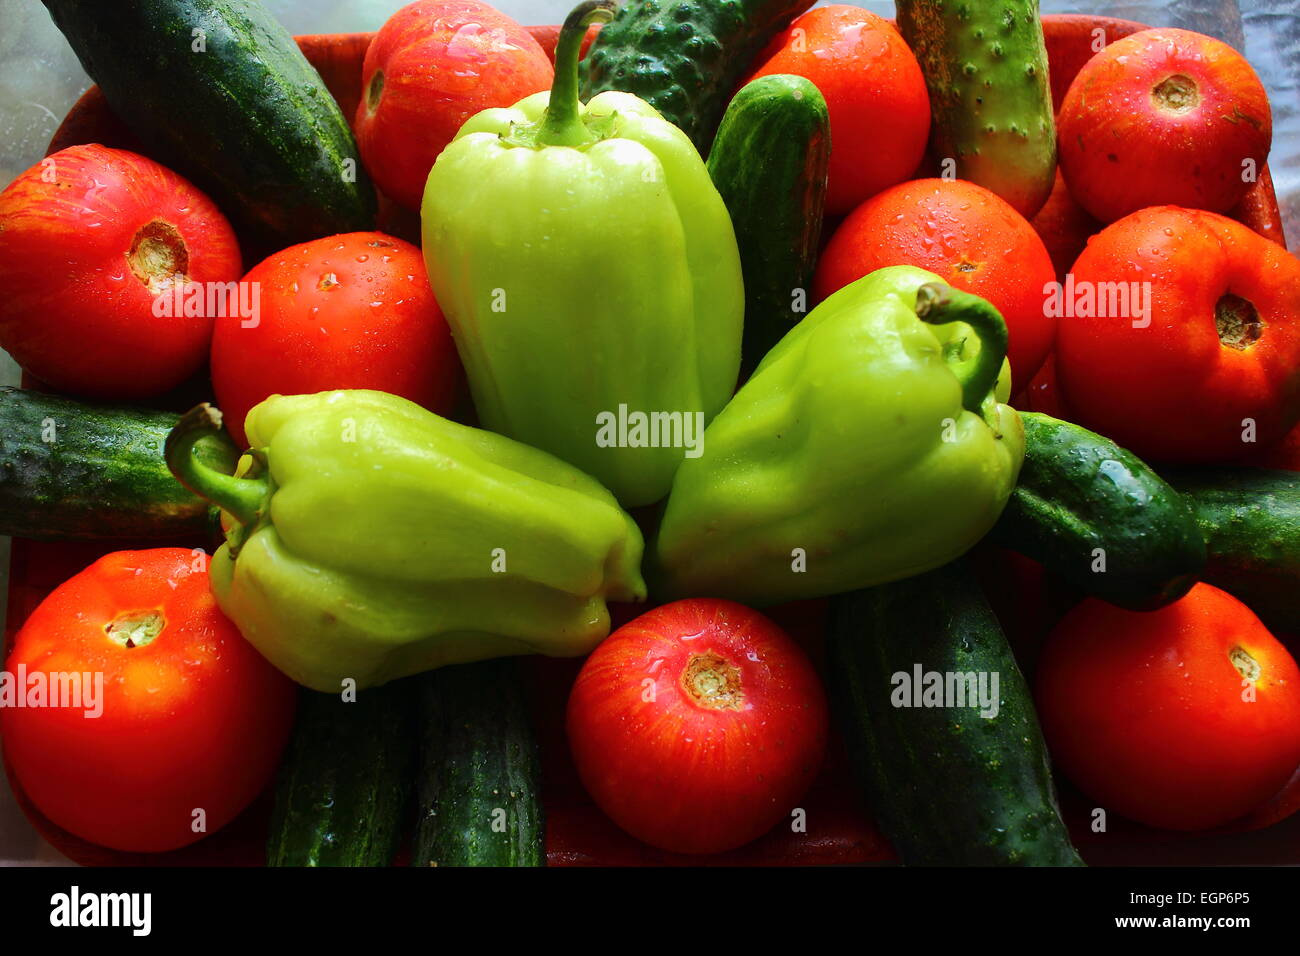 on the table are whole fresh vegetables as tomatoes, cucumbers, peppers Stock Photo